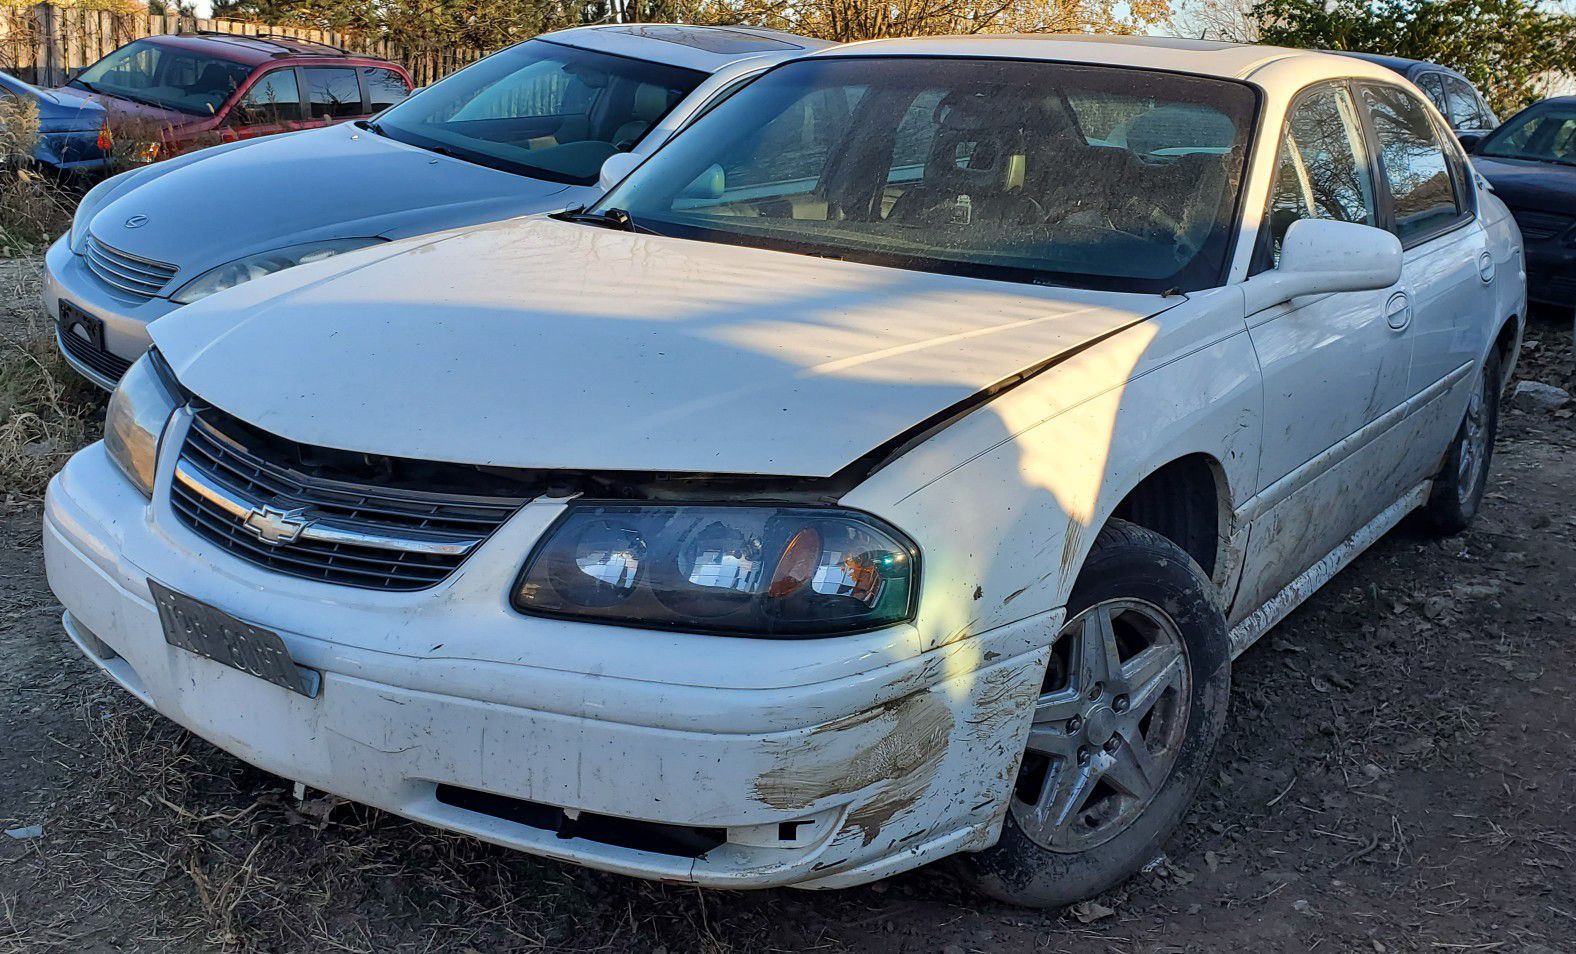 2005 chevy Impala 3.8 for parts